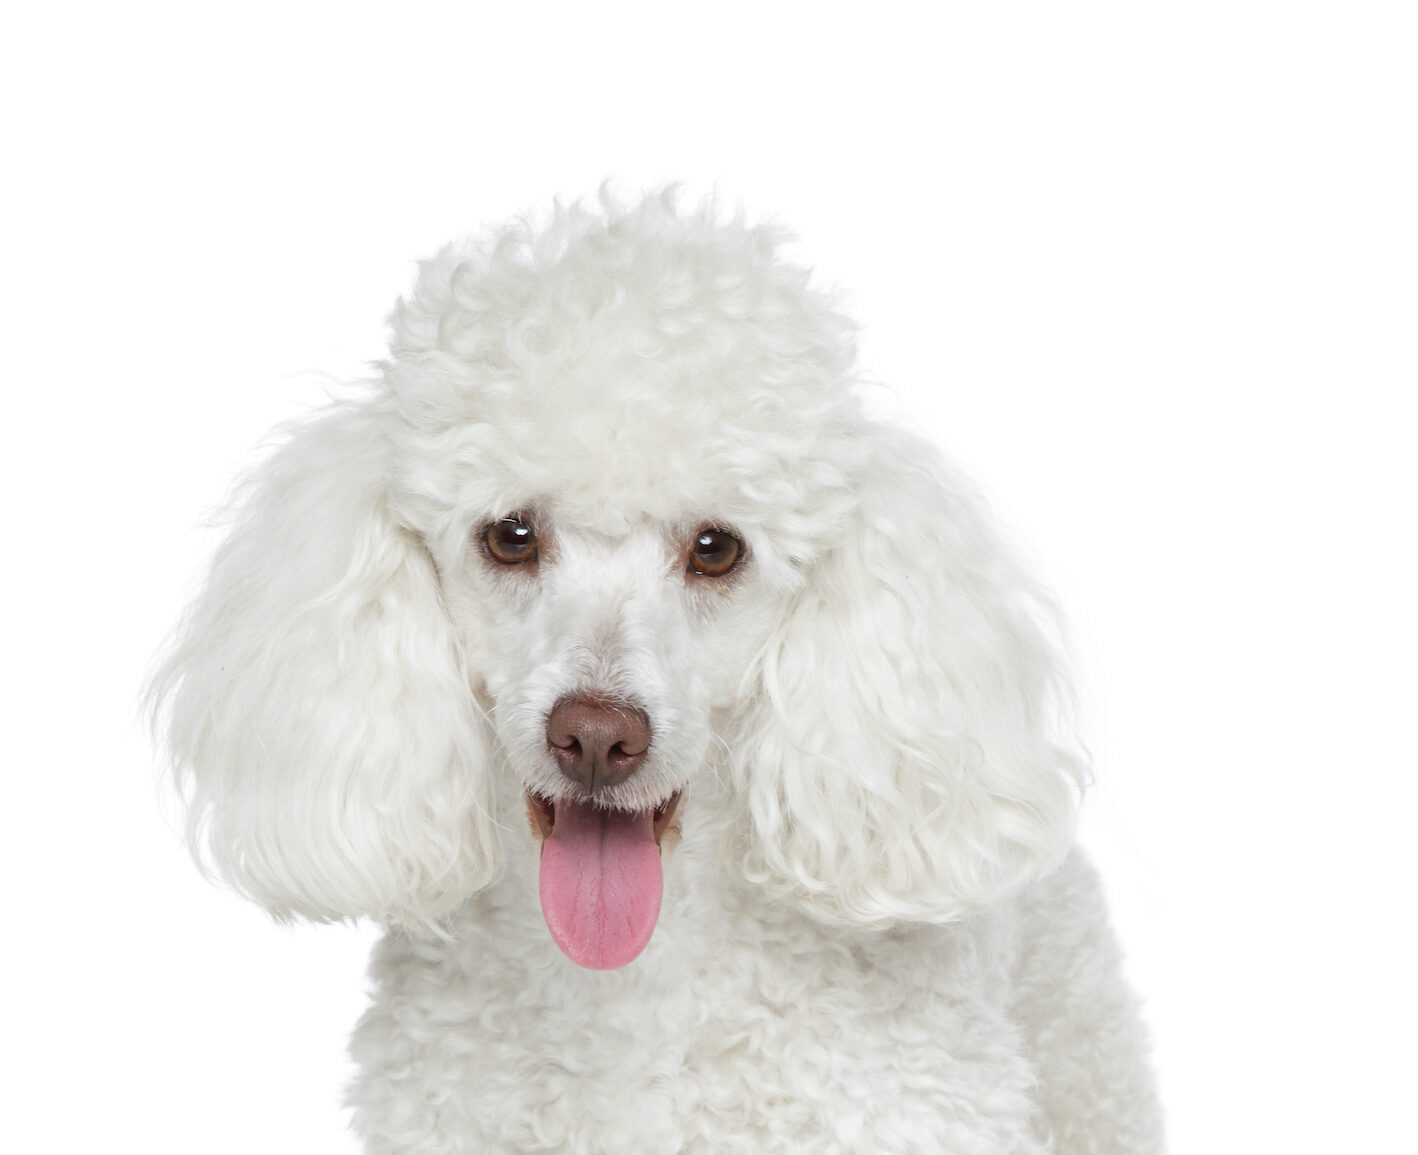 Poodle (Toy and Miniature) Facts - Wisdom Panel™ Dog Breeds